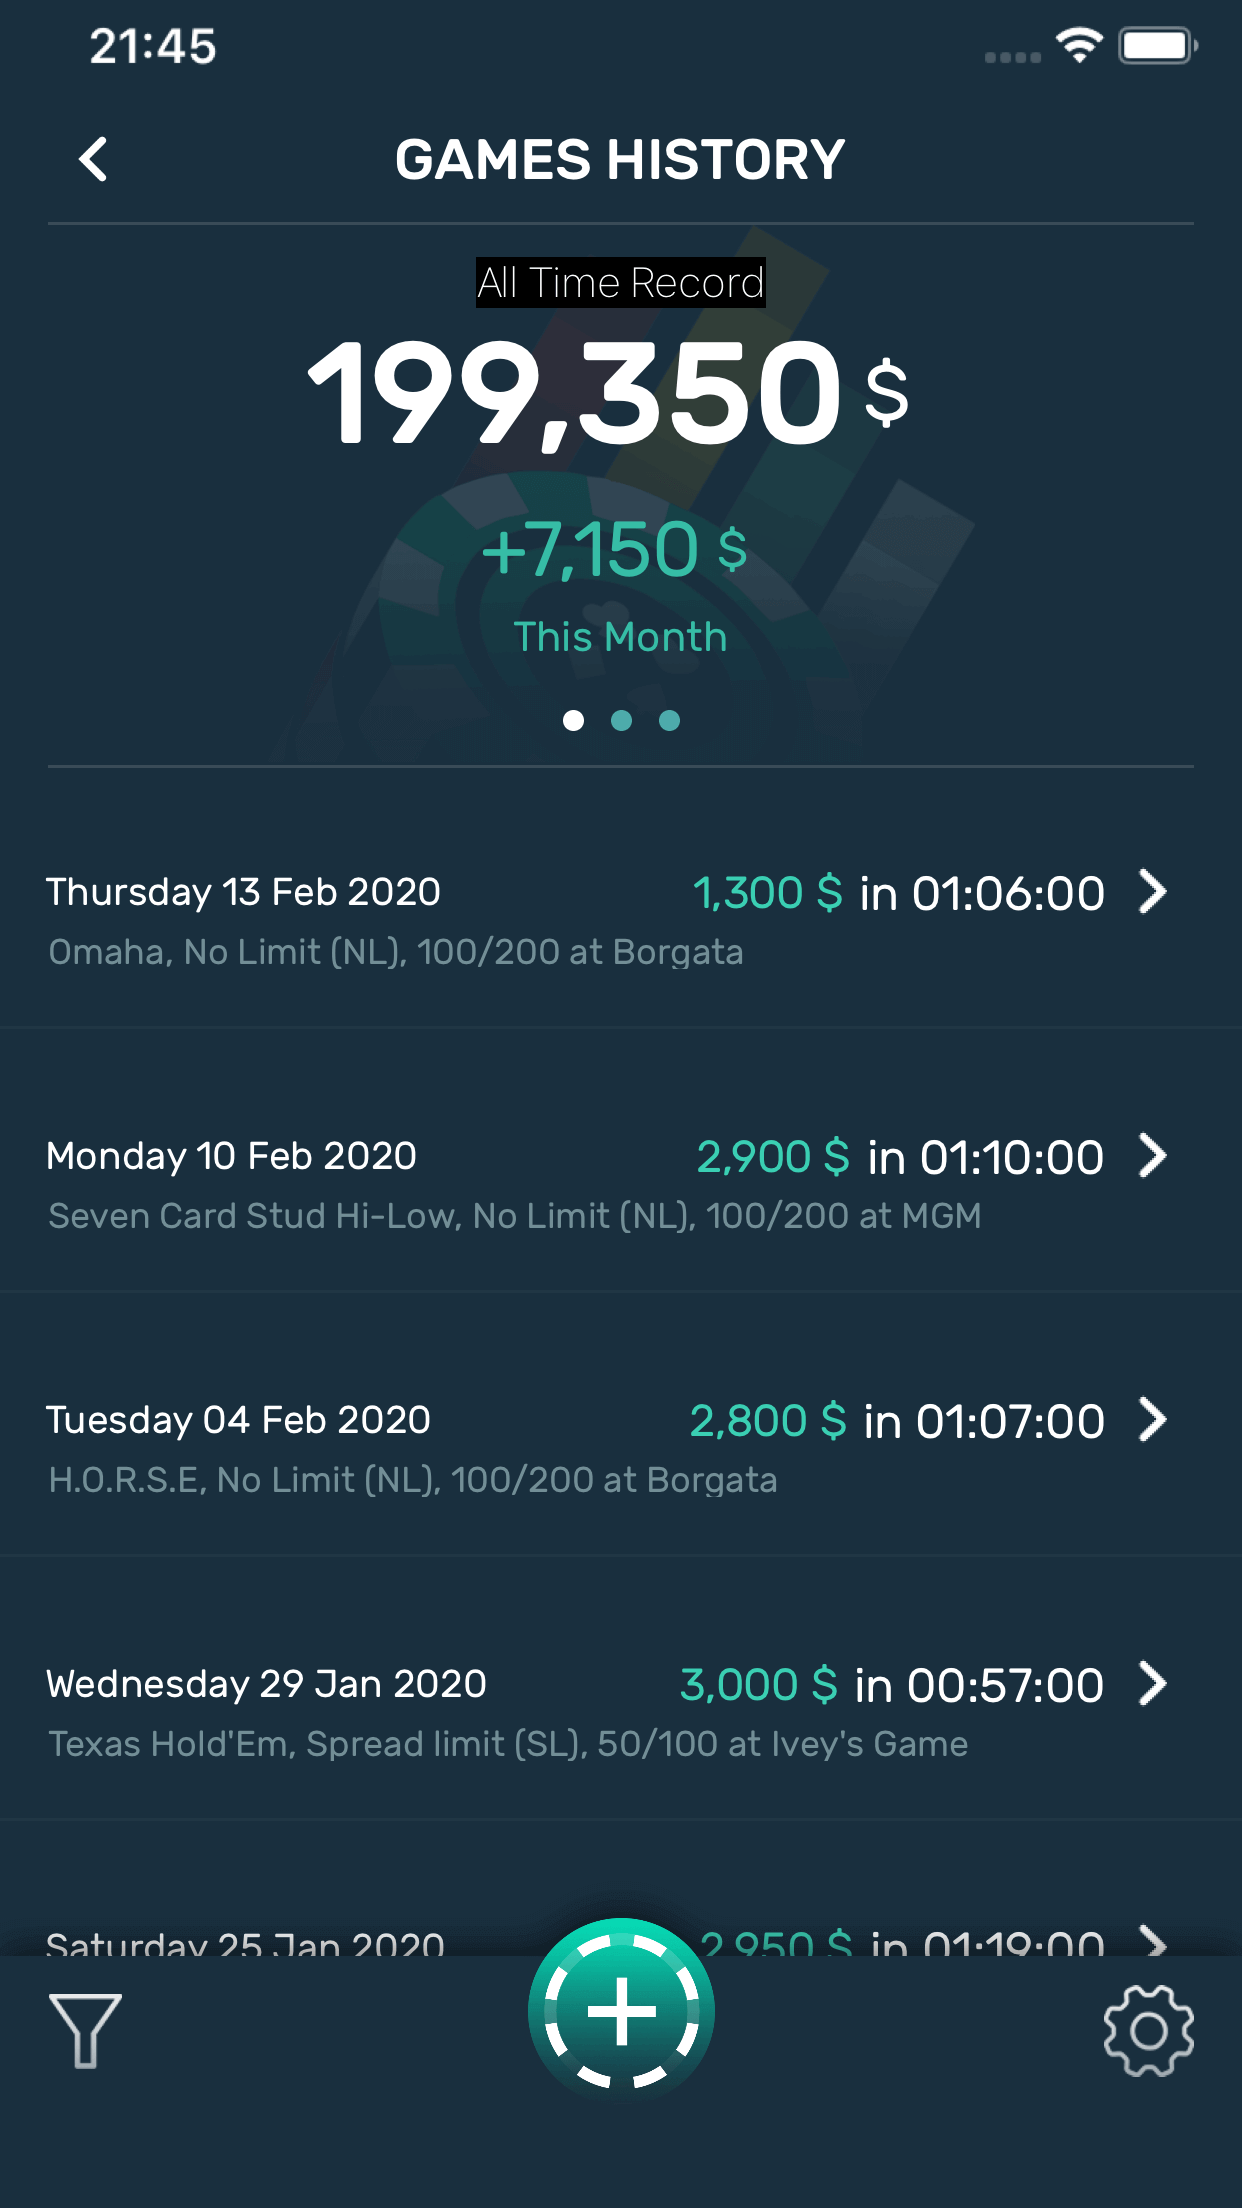 Detailed view of a user's poker game history, including dates and financial outcomes, in the Poker Stack app.